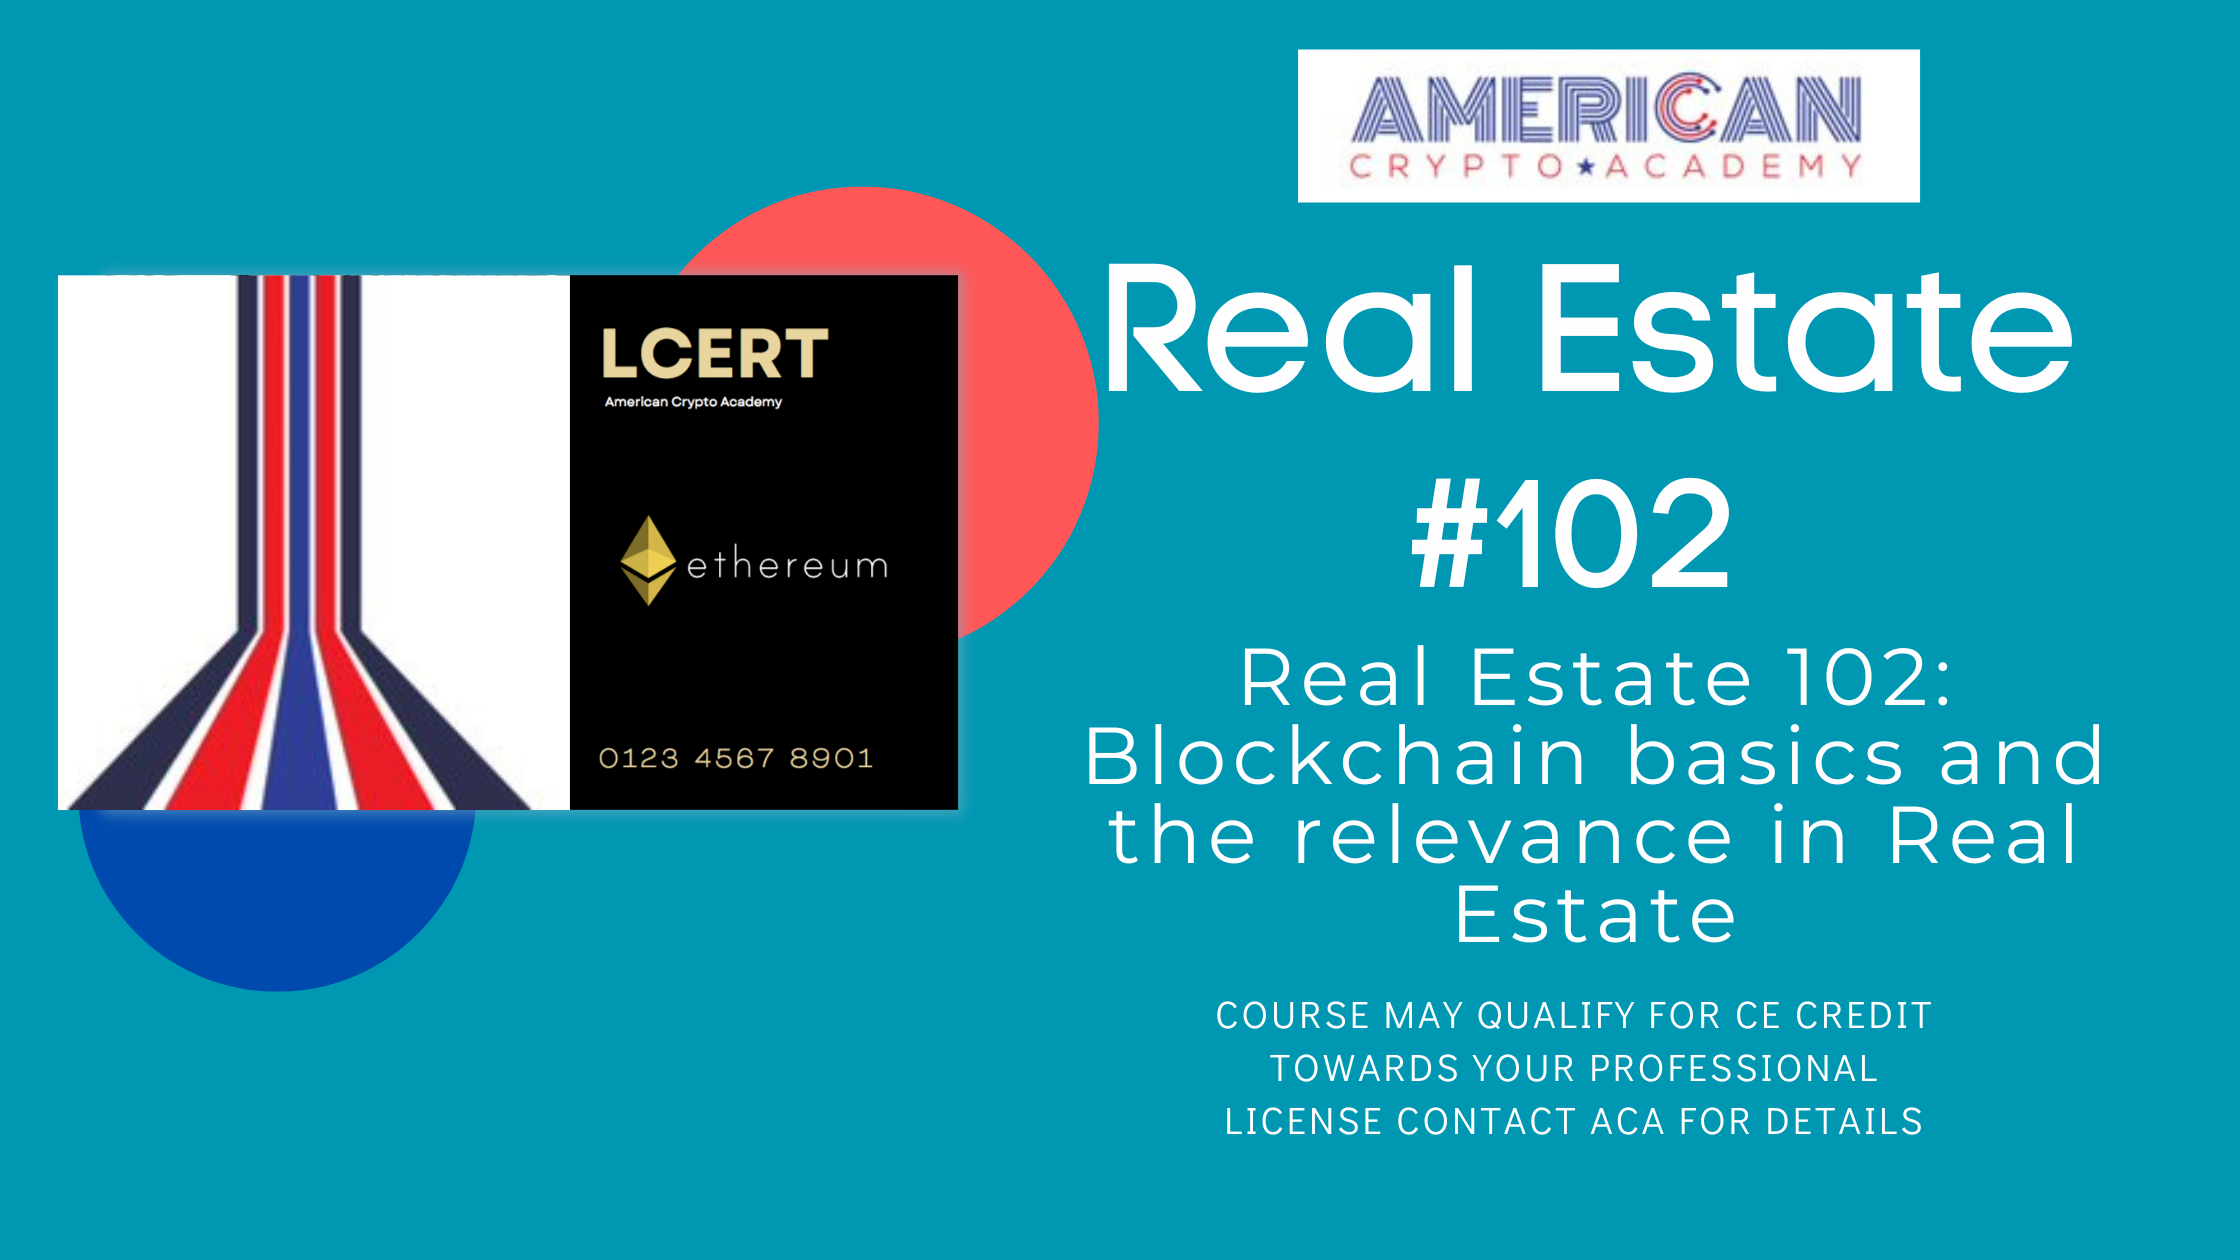 Real Estate 102: Blockchain basics and the relevance in Real Estate